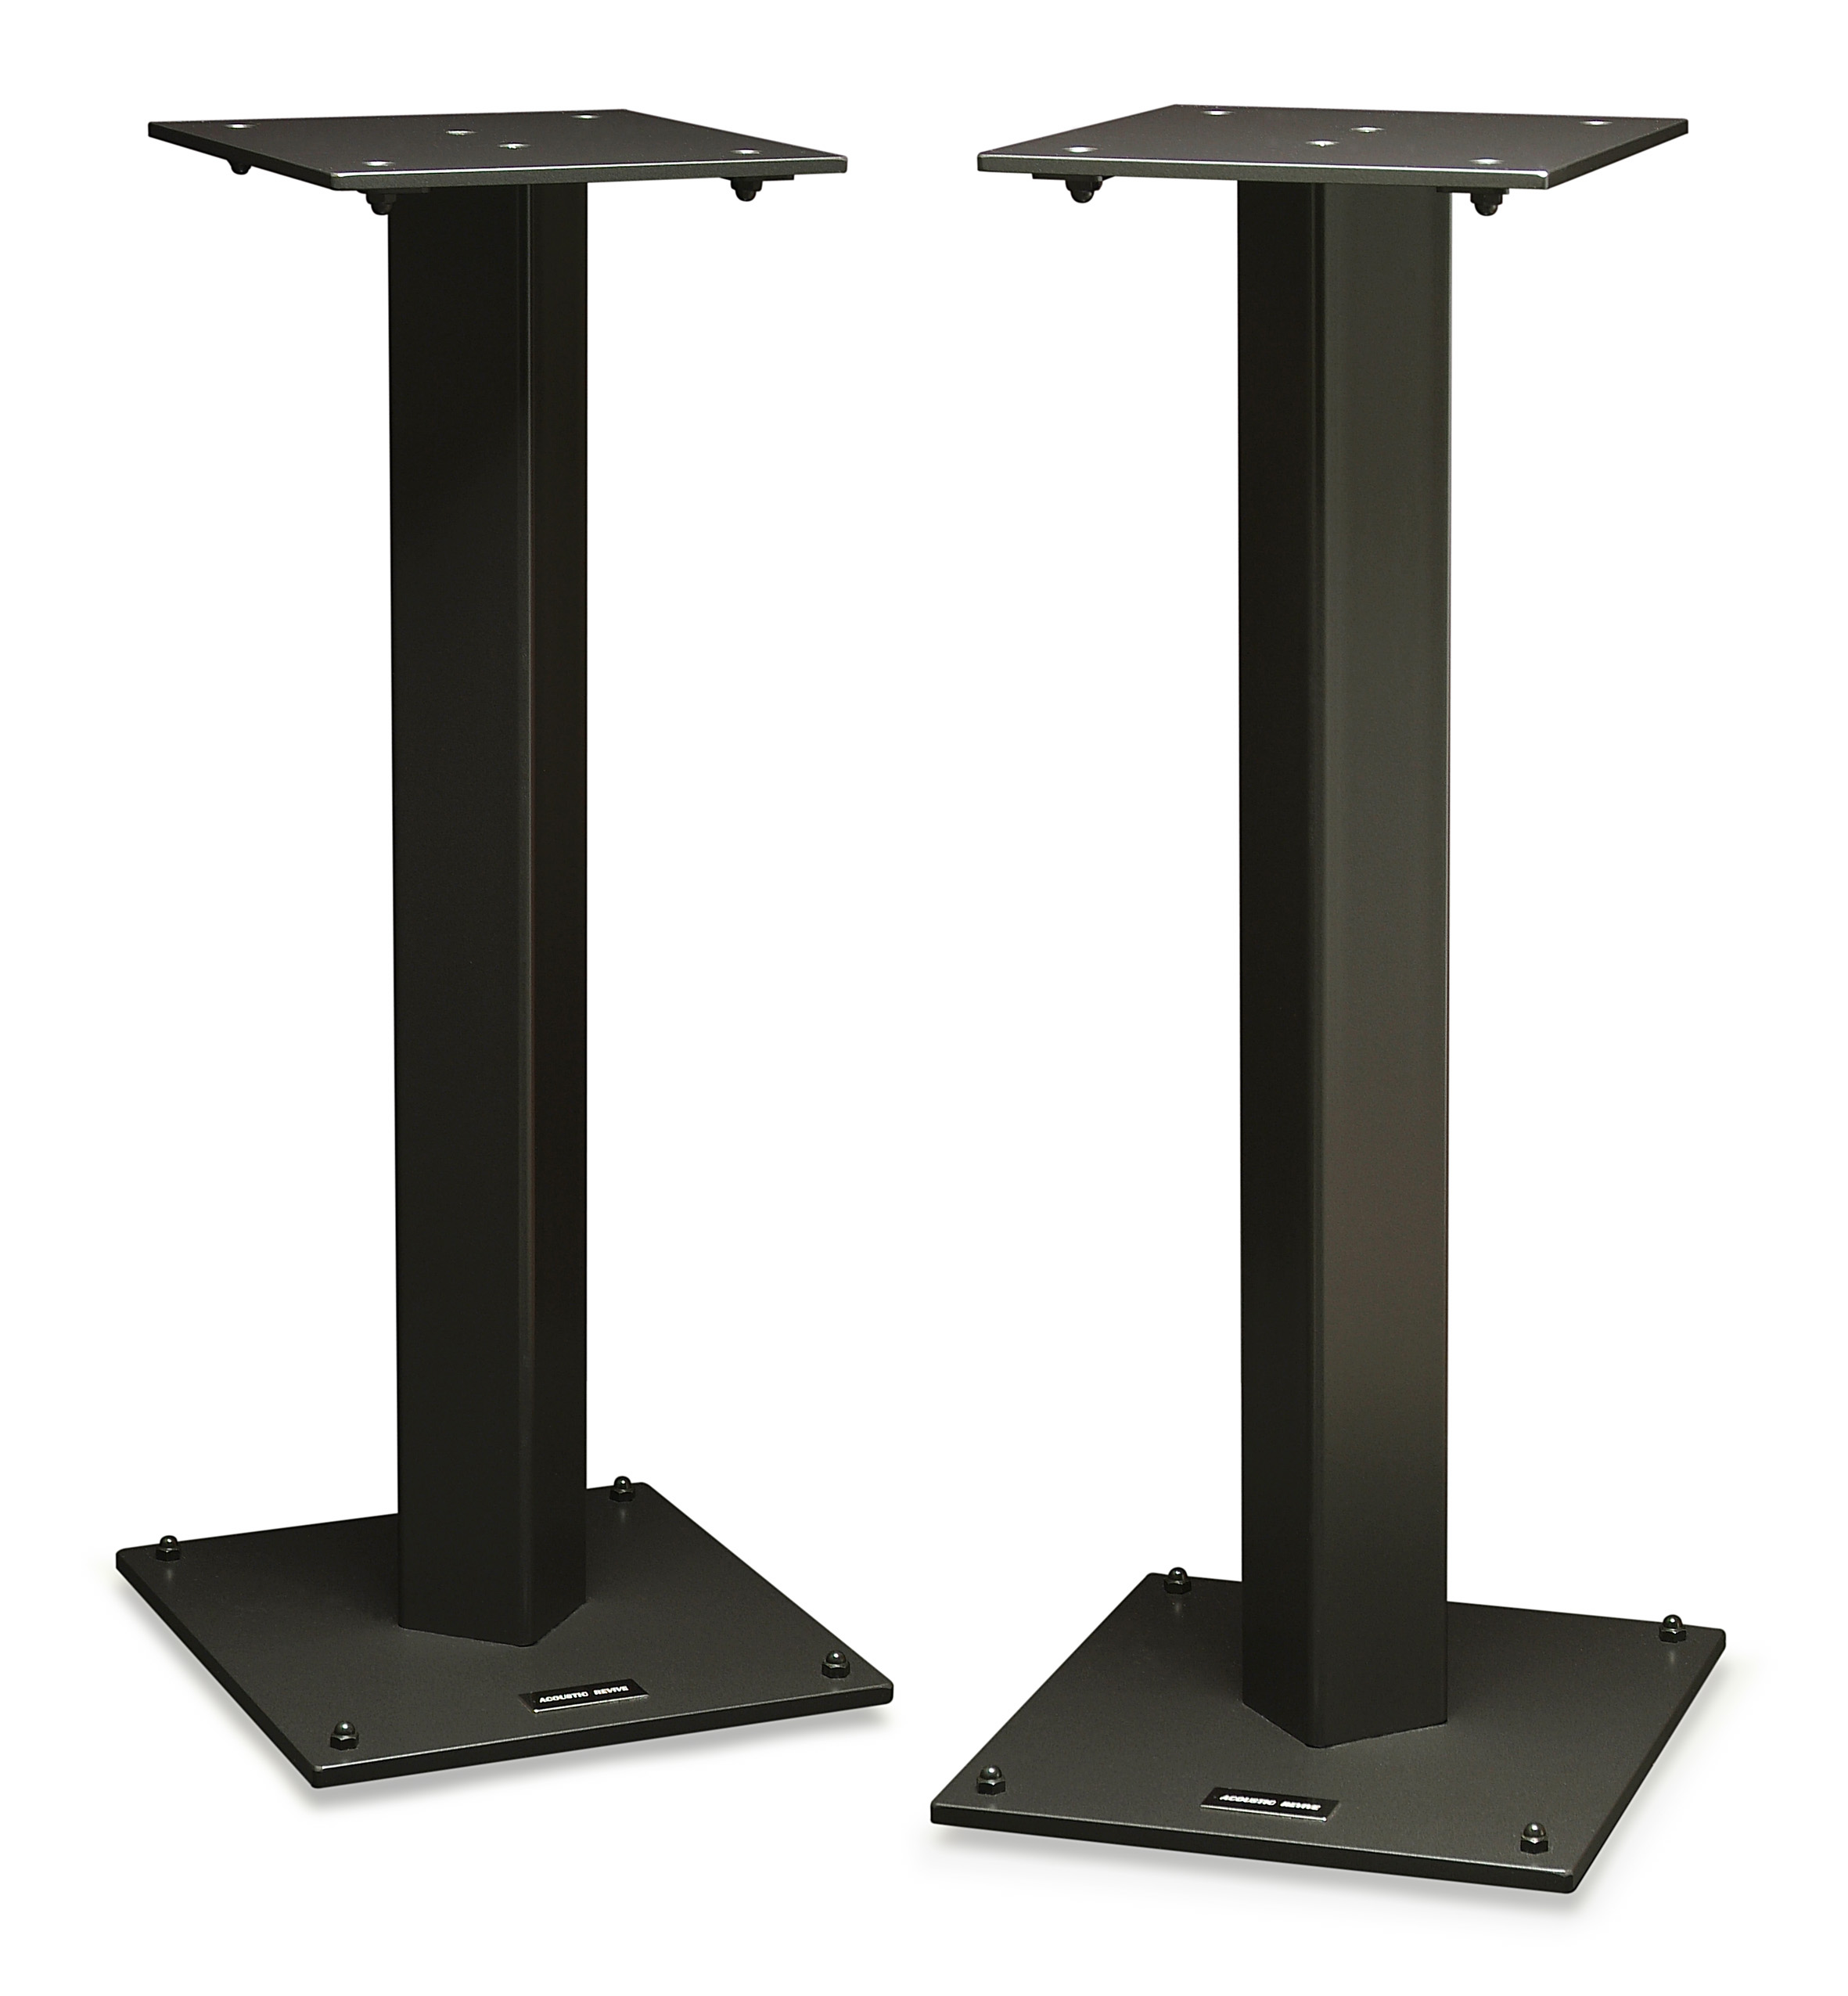 Speaker Stand | Acoustic Revive